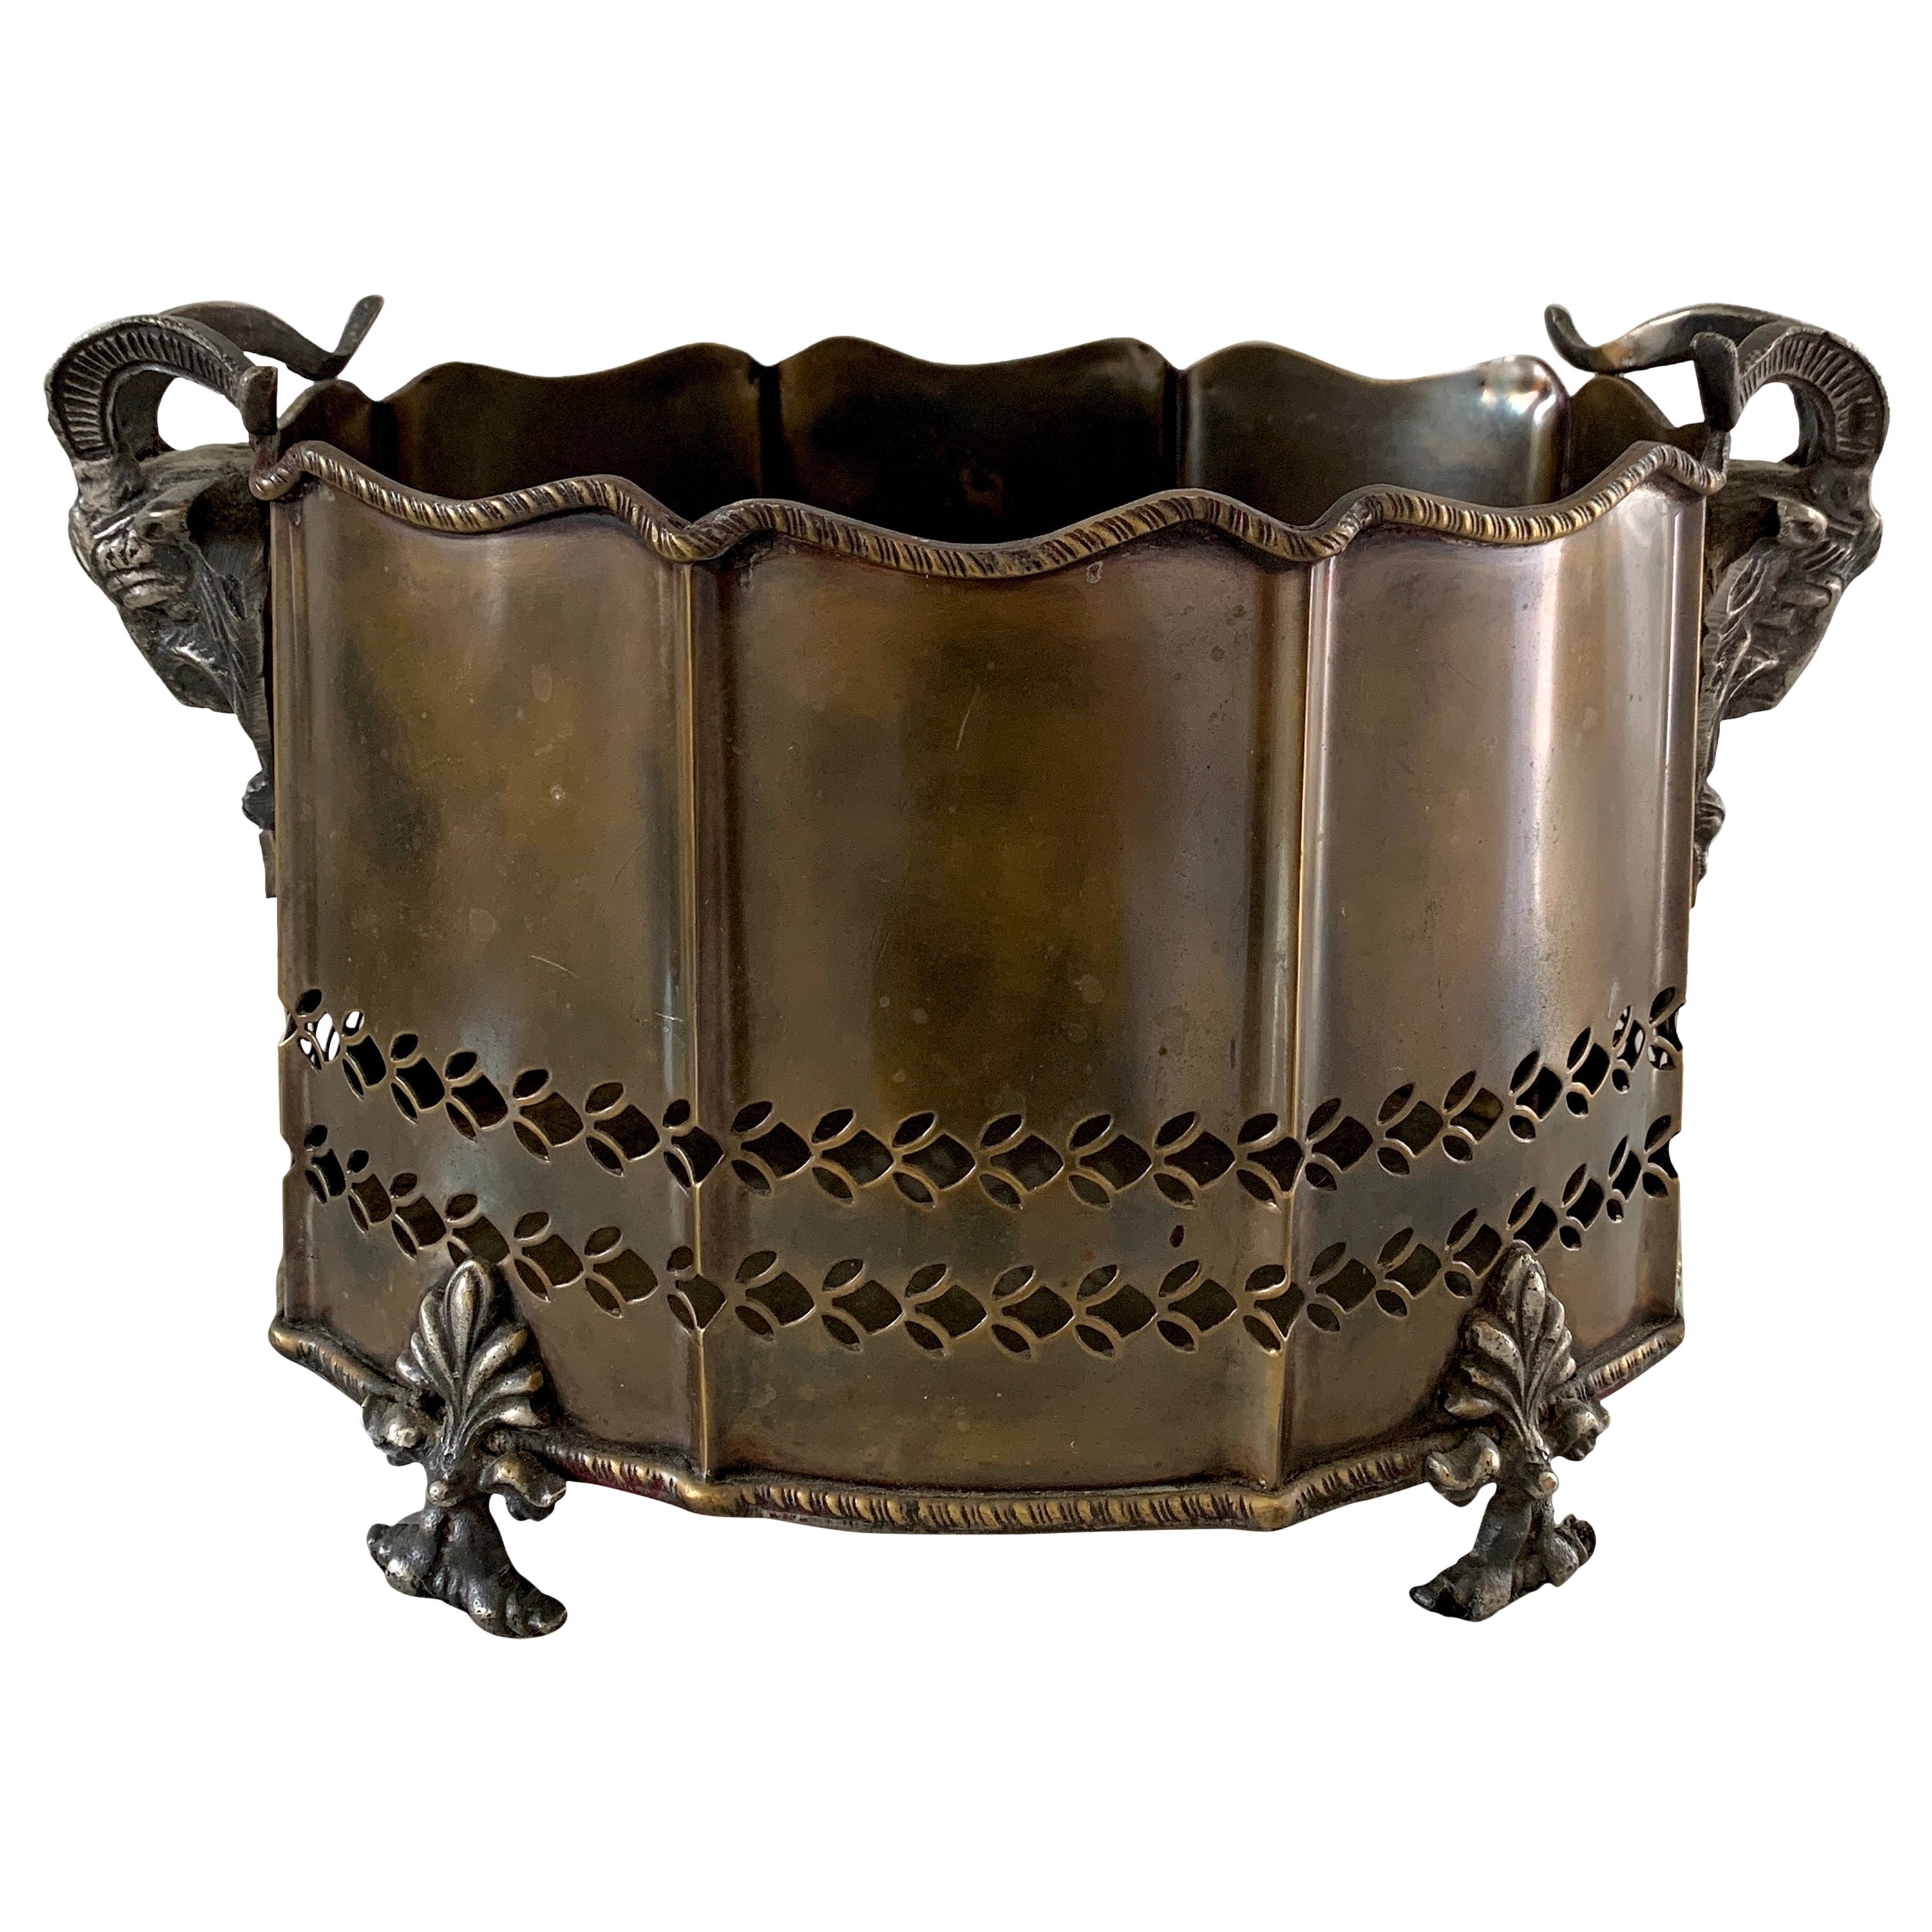 Neoclassical Brass Cachepot Planter with Ram's Heads